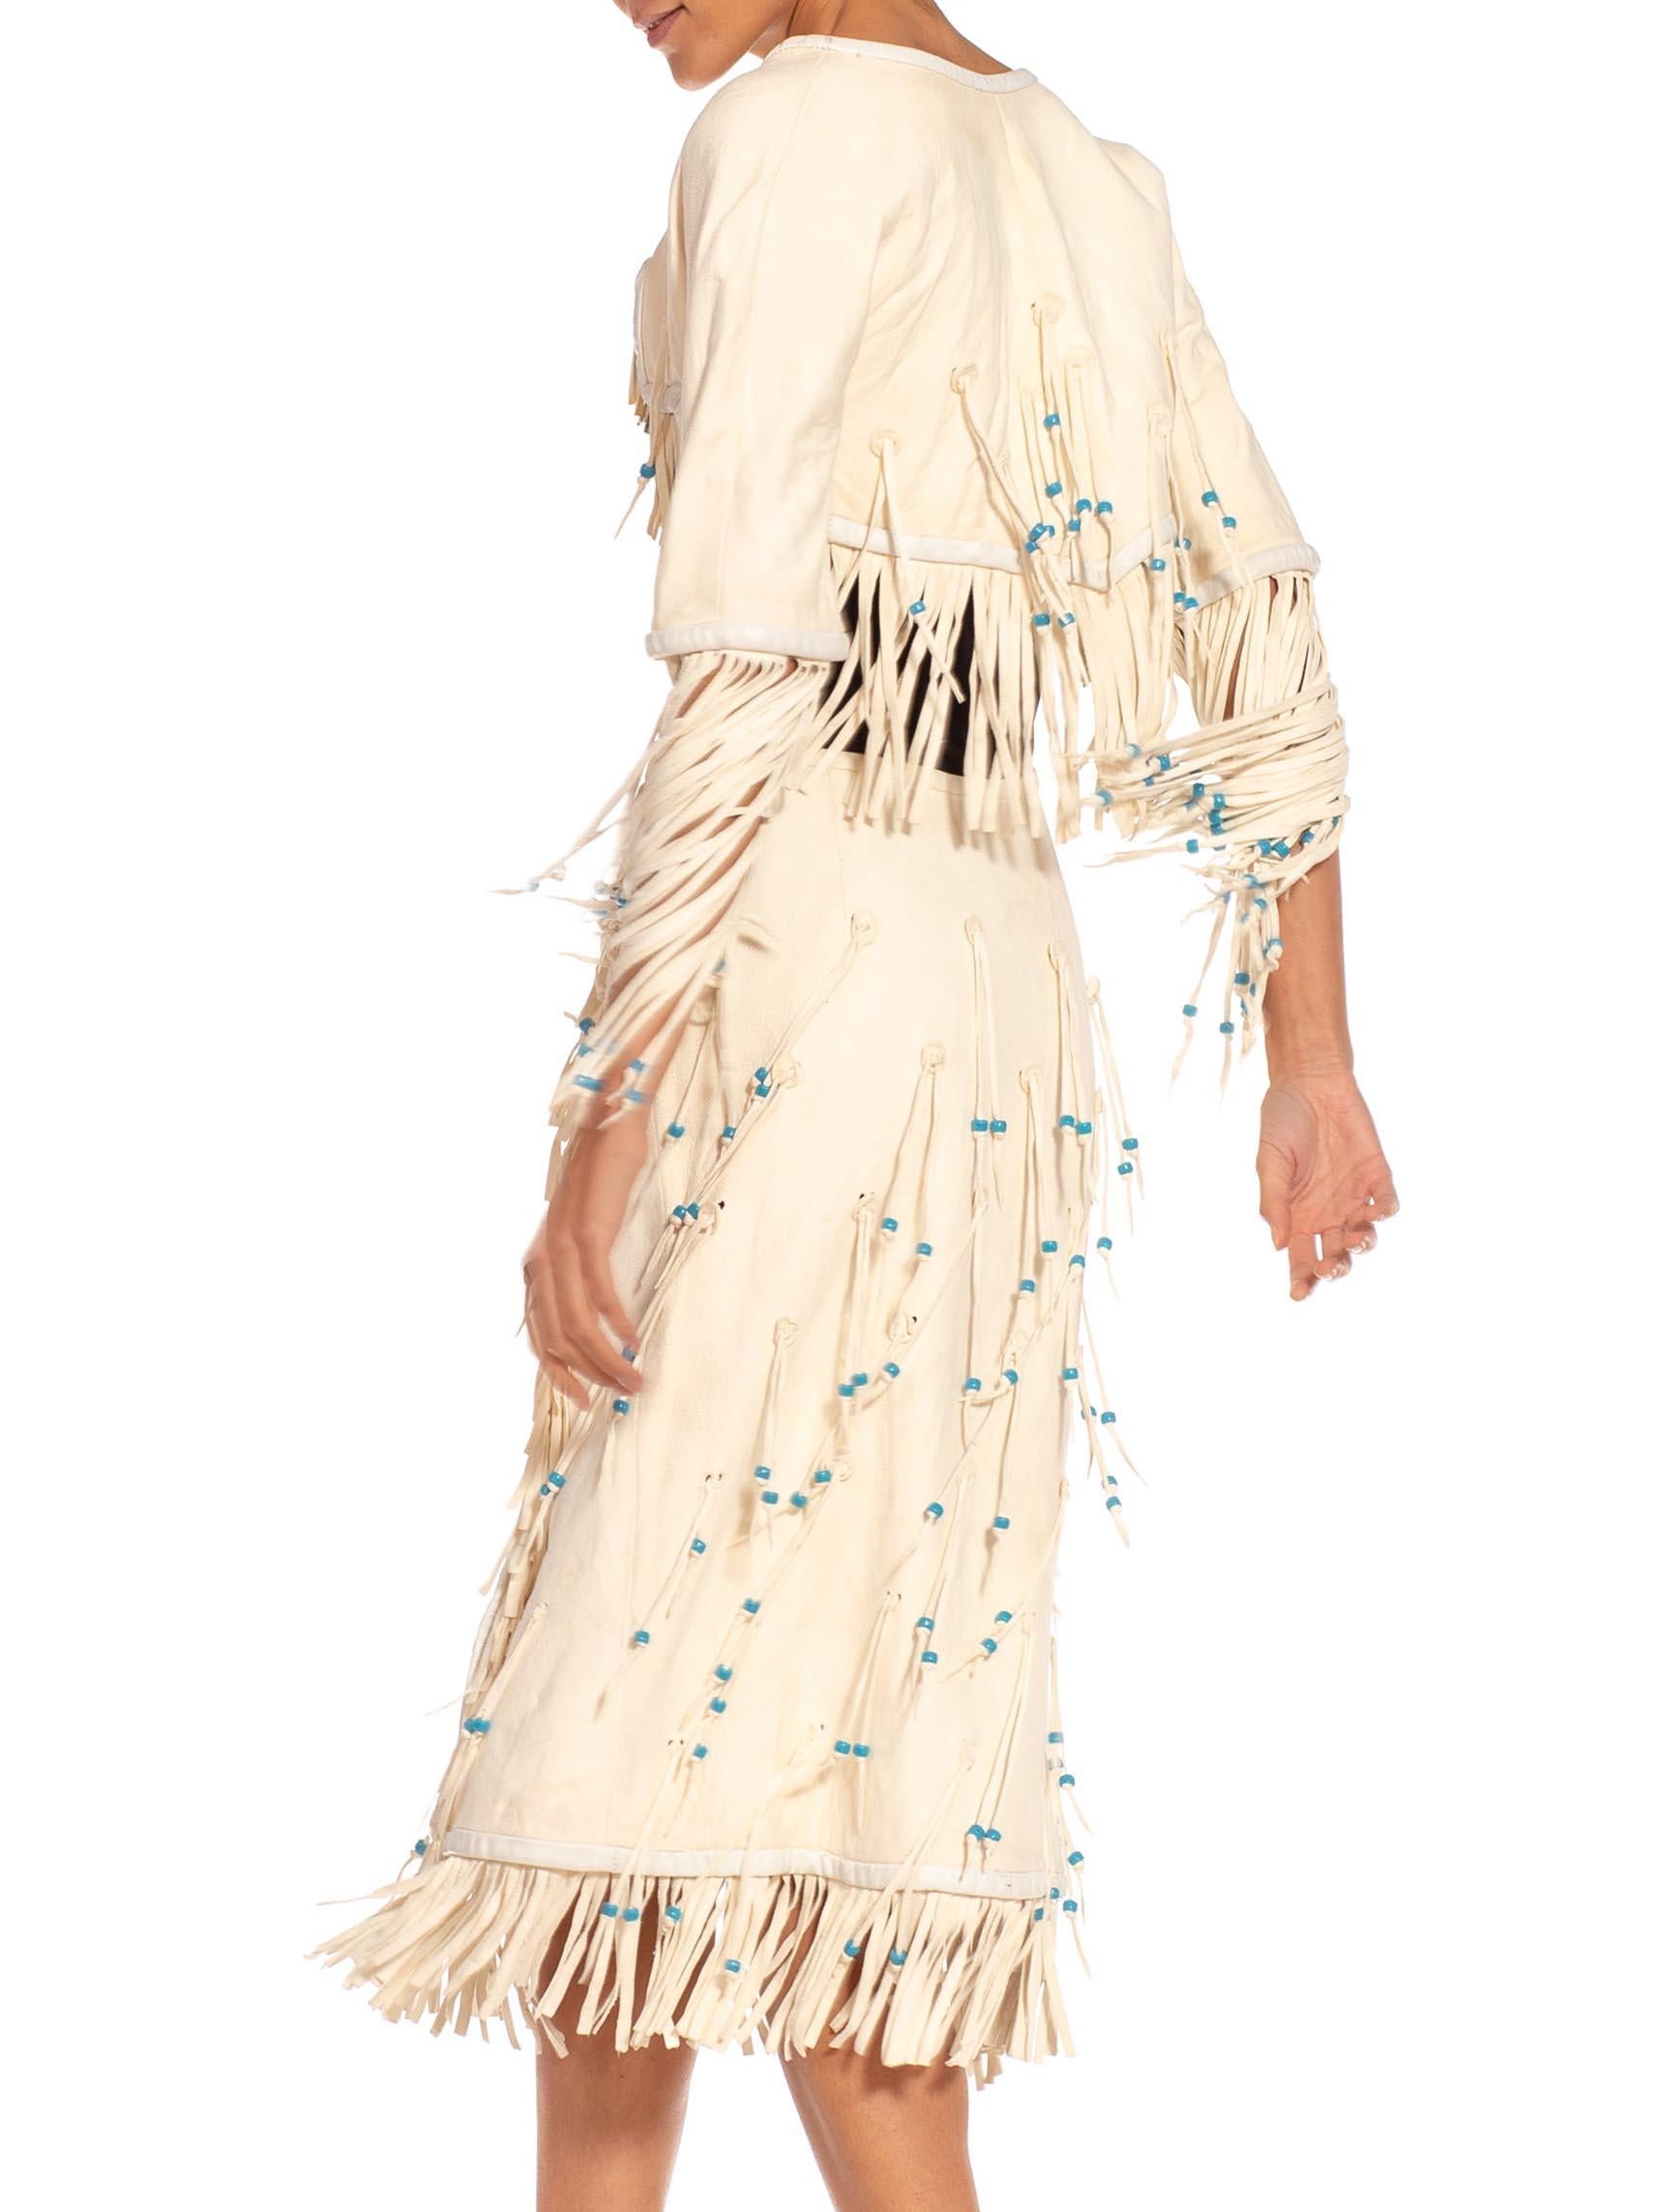 1970S GEORGIO SANT'angelo White & Blue Leather Suede Beaded Fringe Jacket Skirt For Sale 5